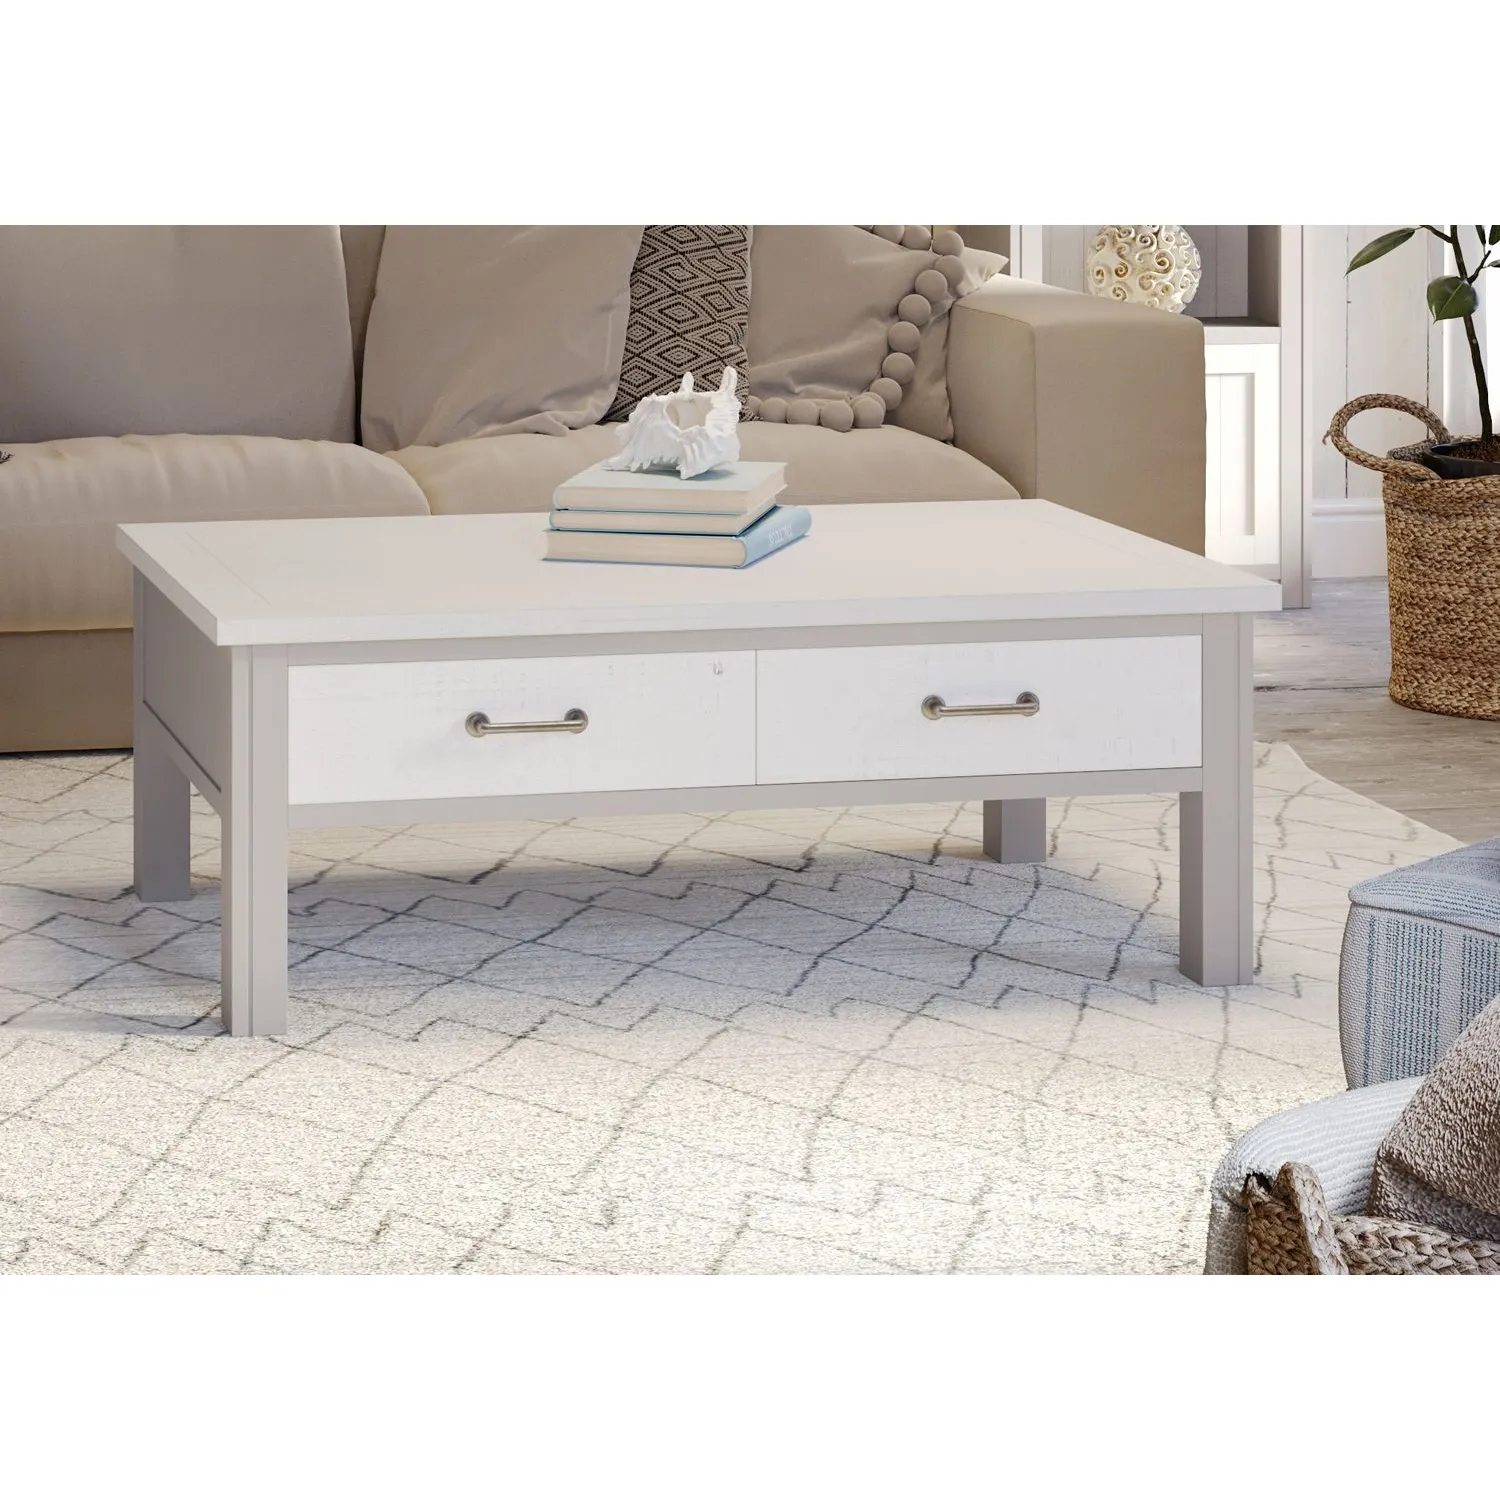 Greystone Coffee Table With Four Drawers